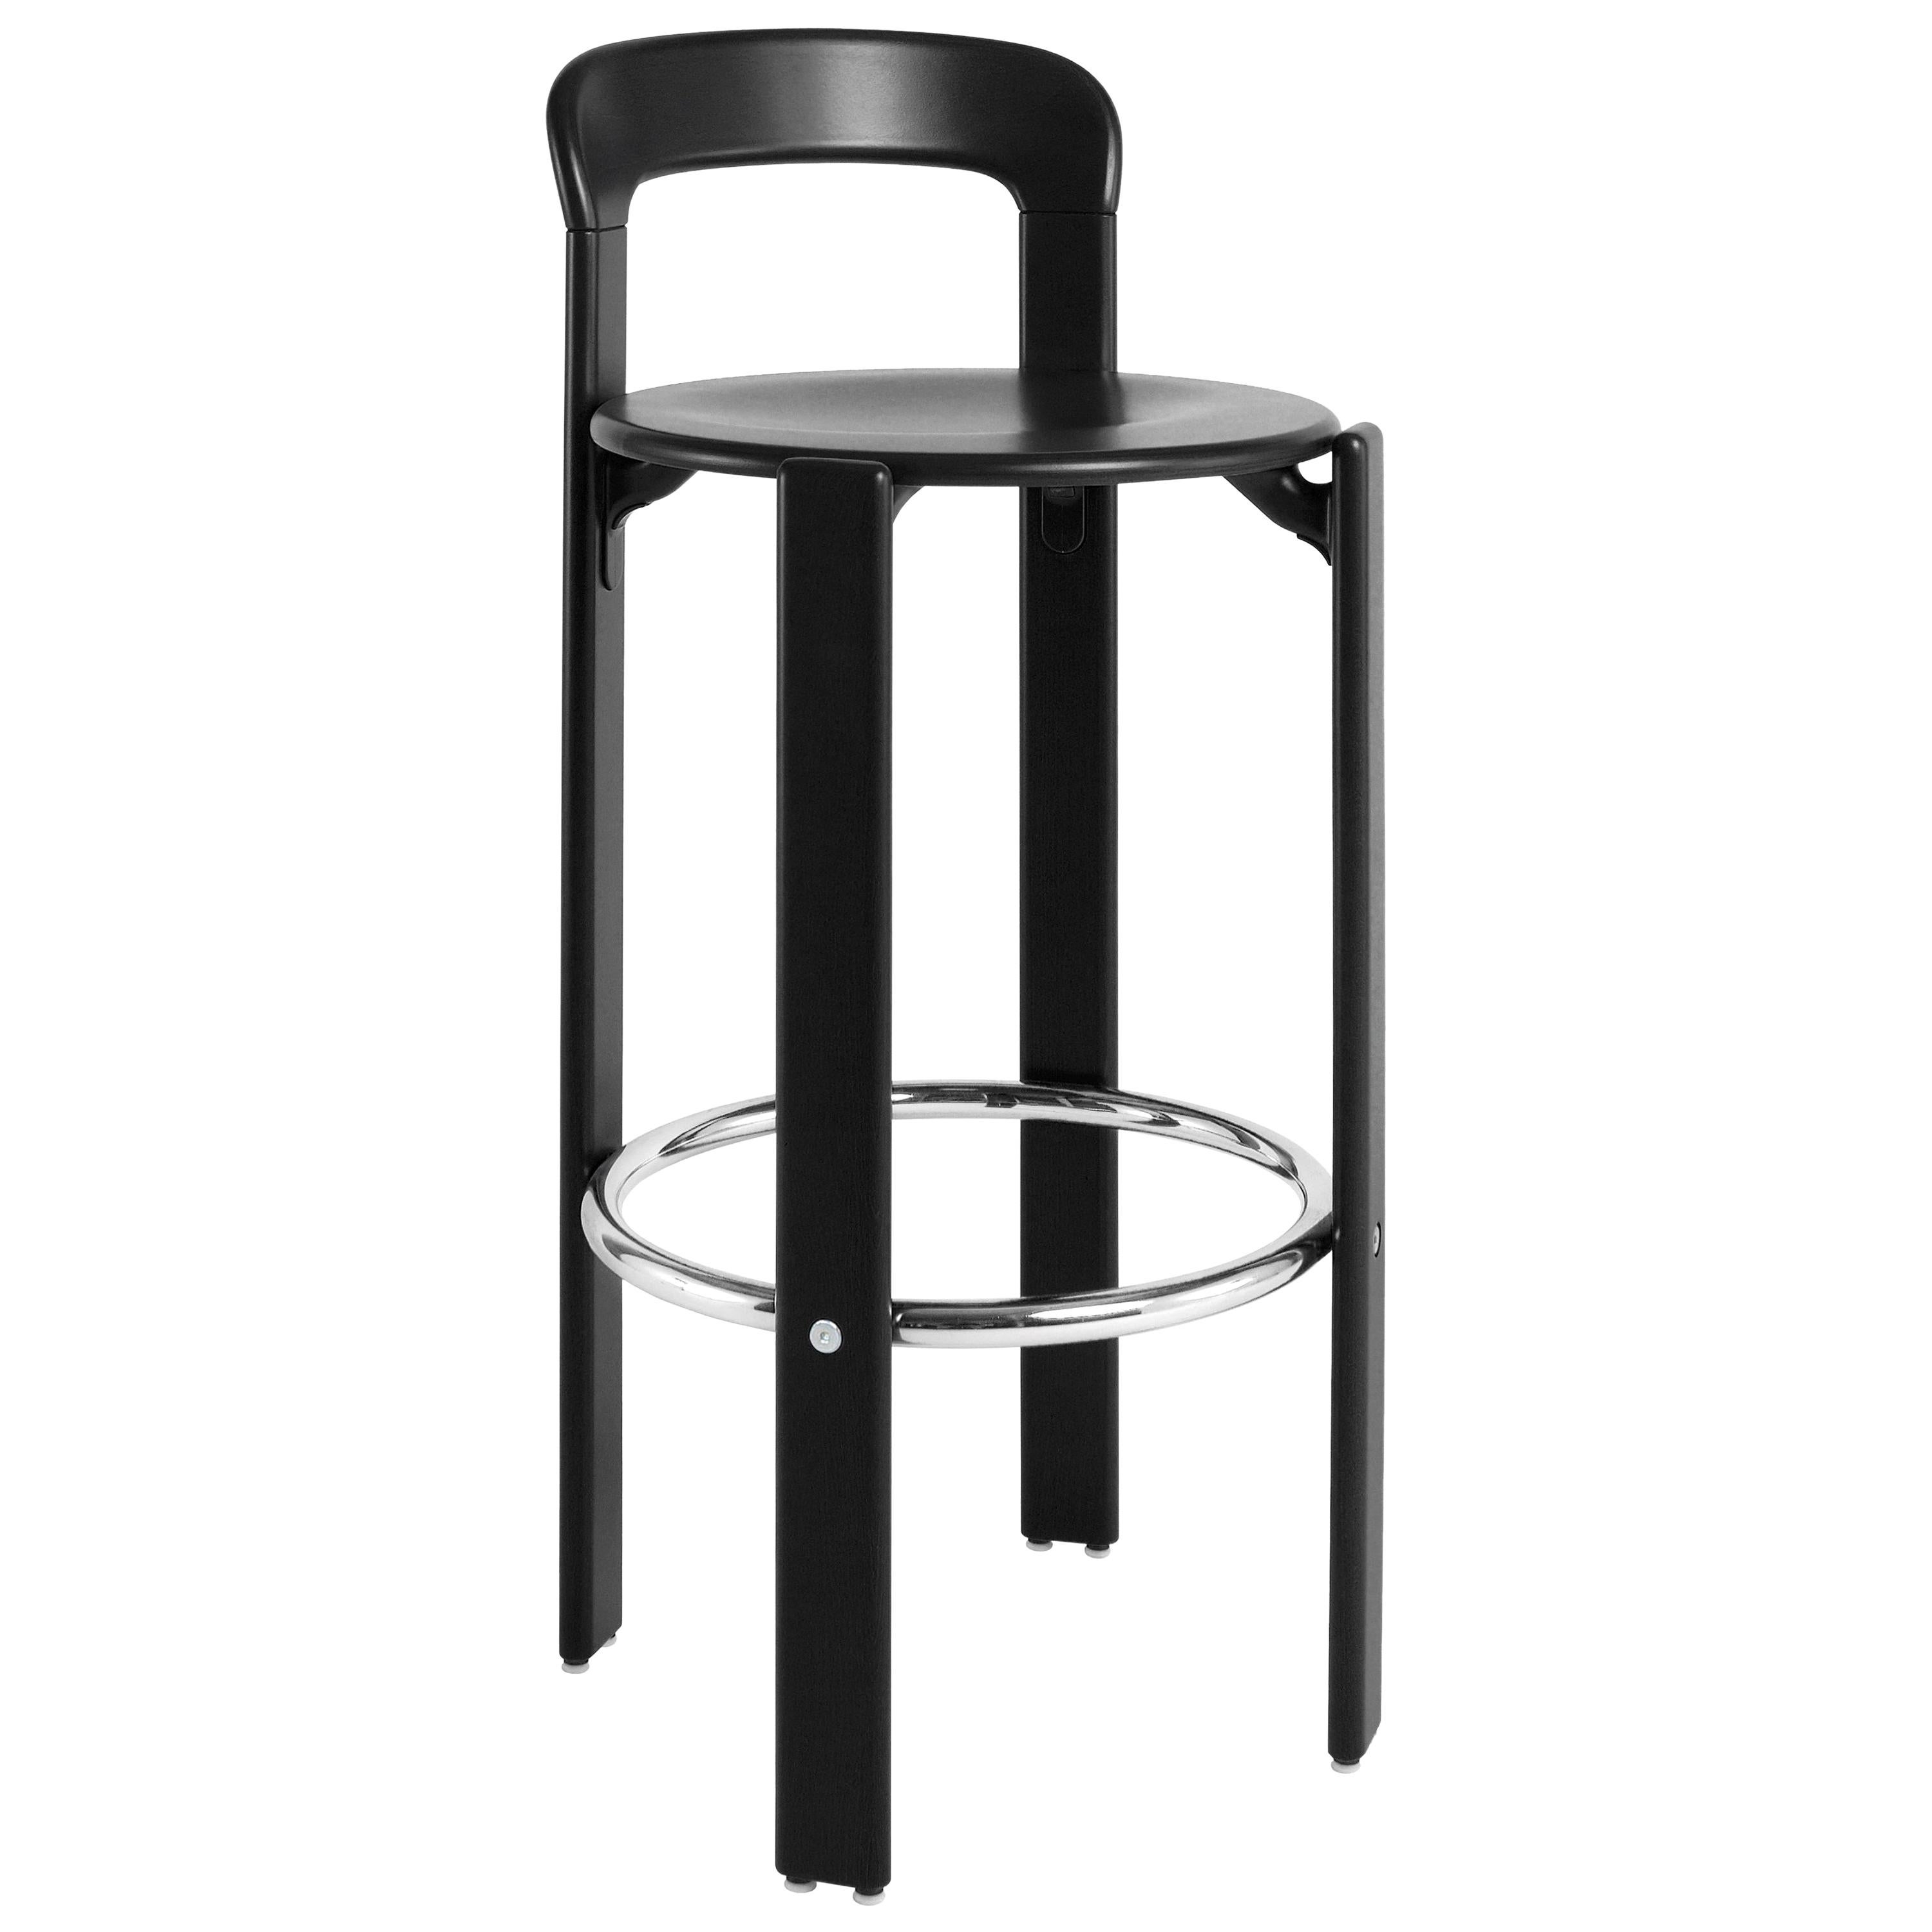 Dietiker Rey Counter Stool with Back, Mid-Century Modern, by Bruno Rey, 1971